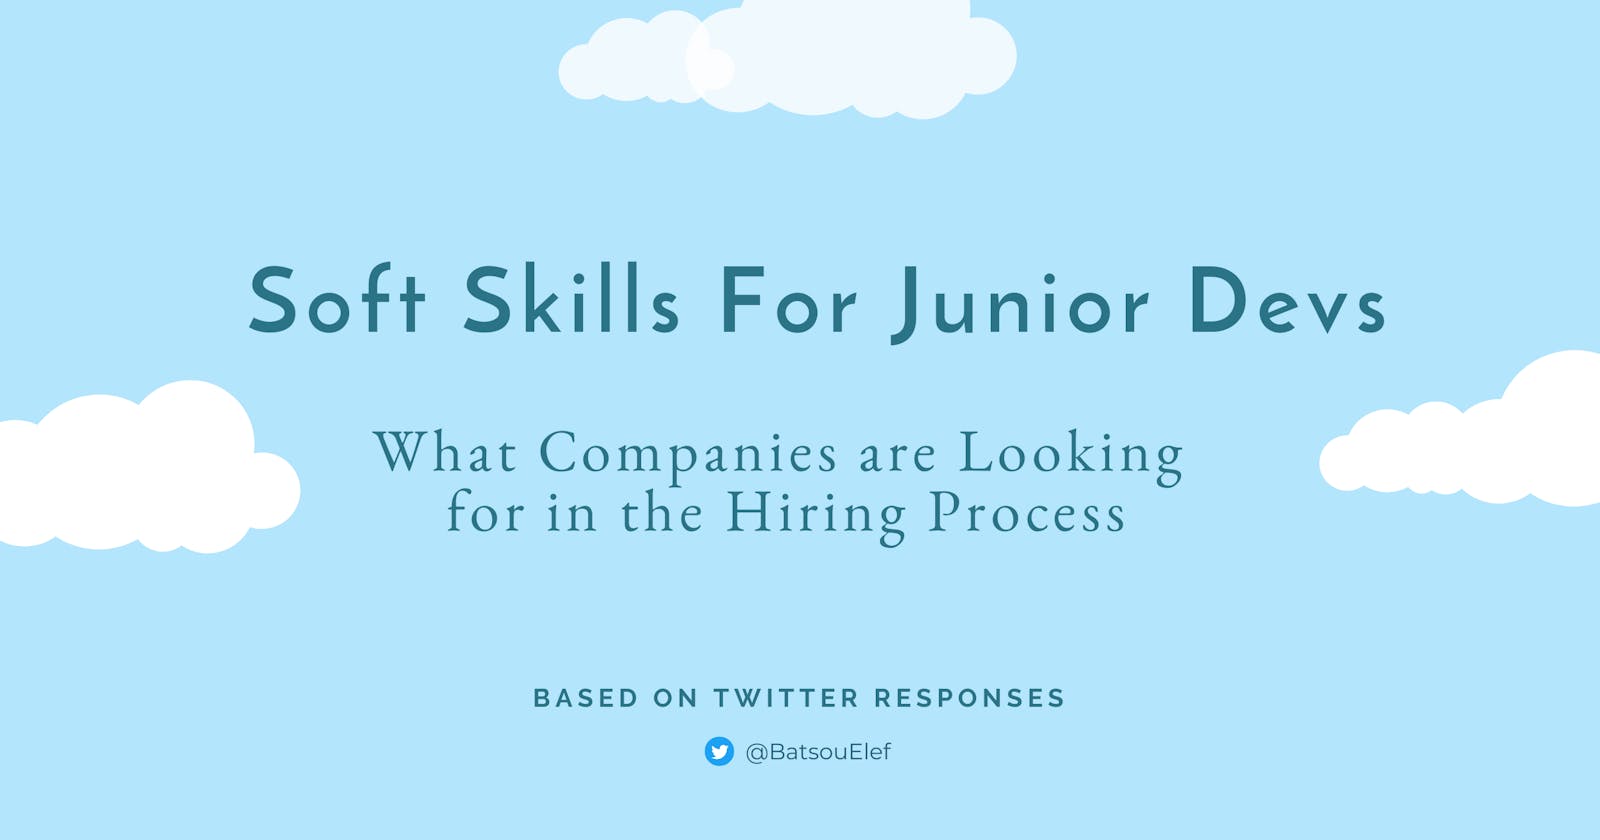 Soft Skills for Junior Developers: What Companies are Looking for in the Hiring Process